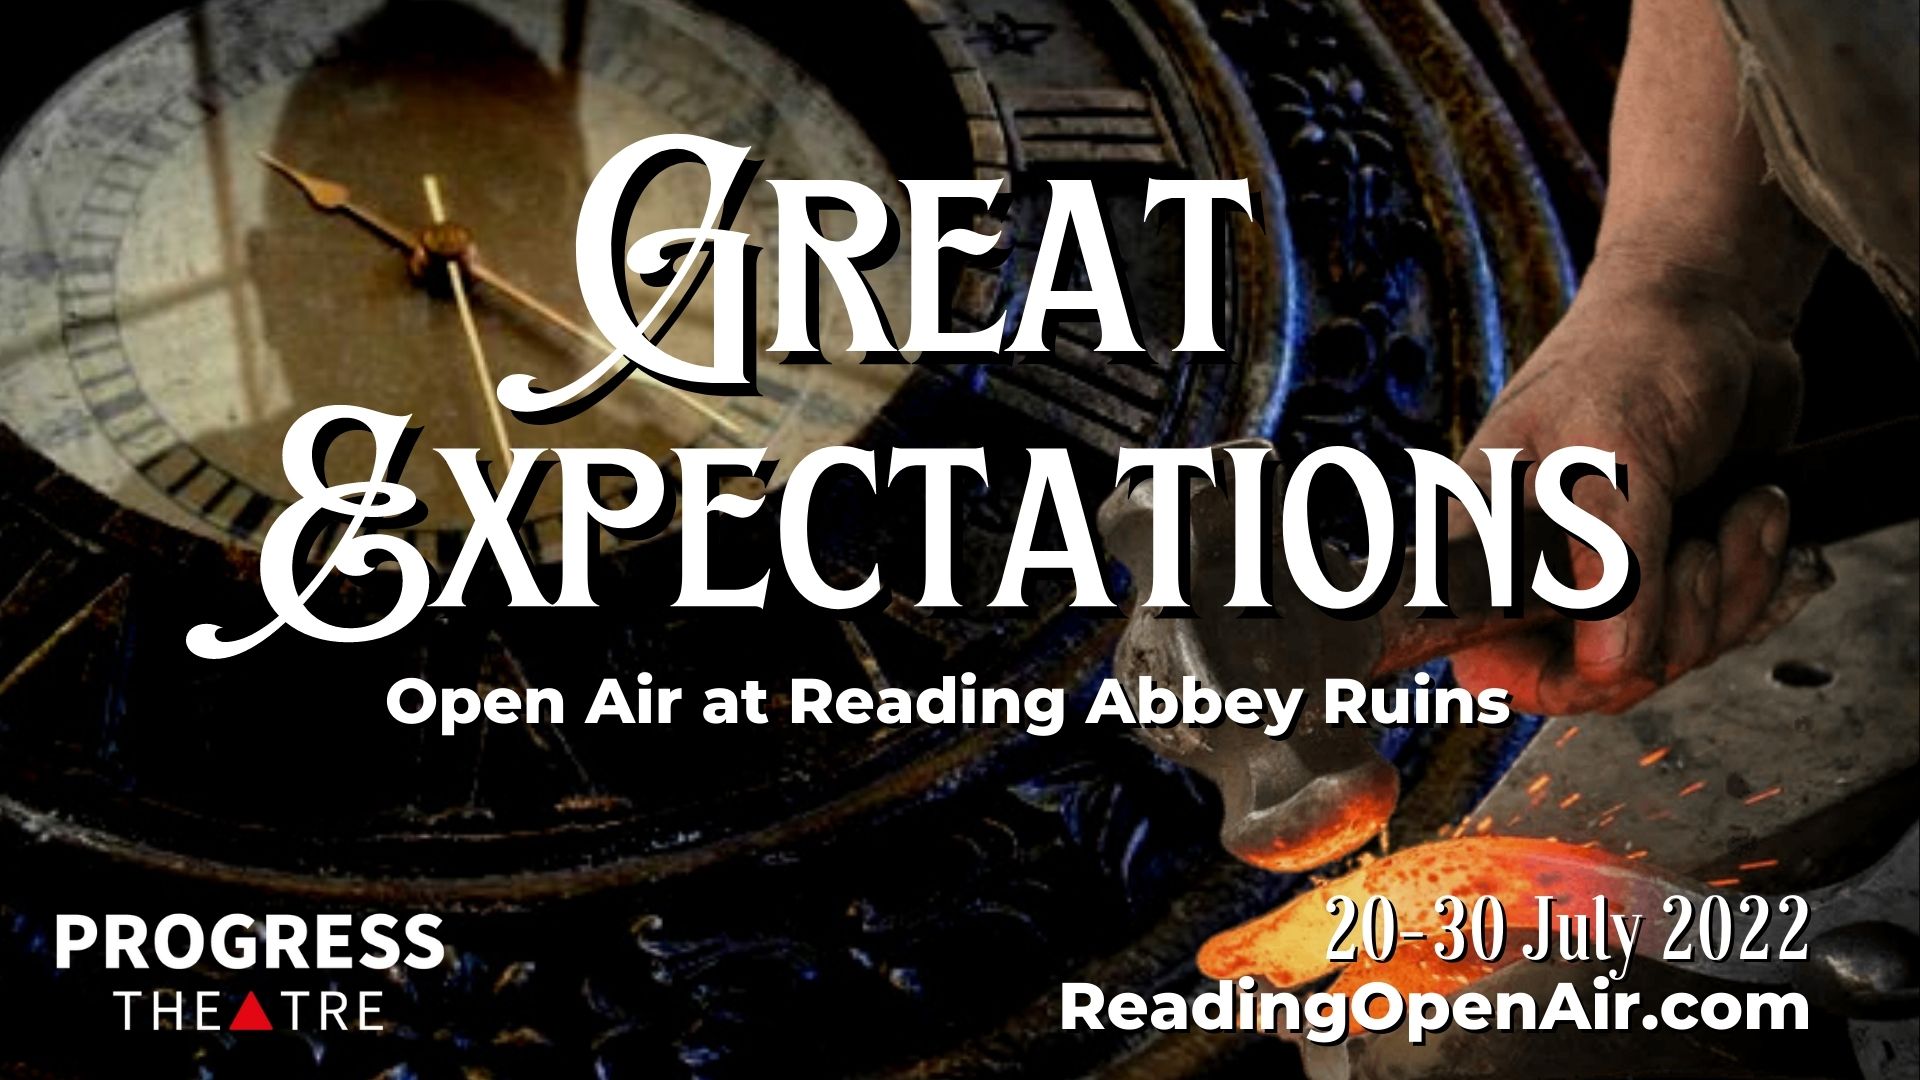 Great Expectations, 20-30 July